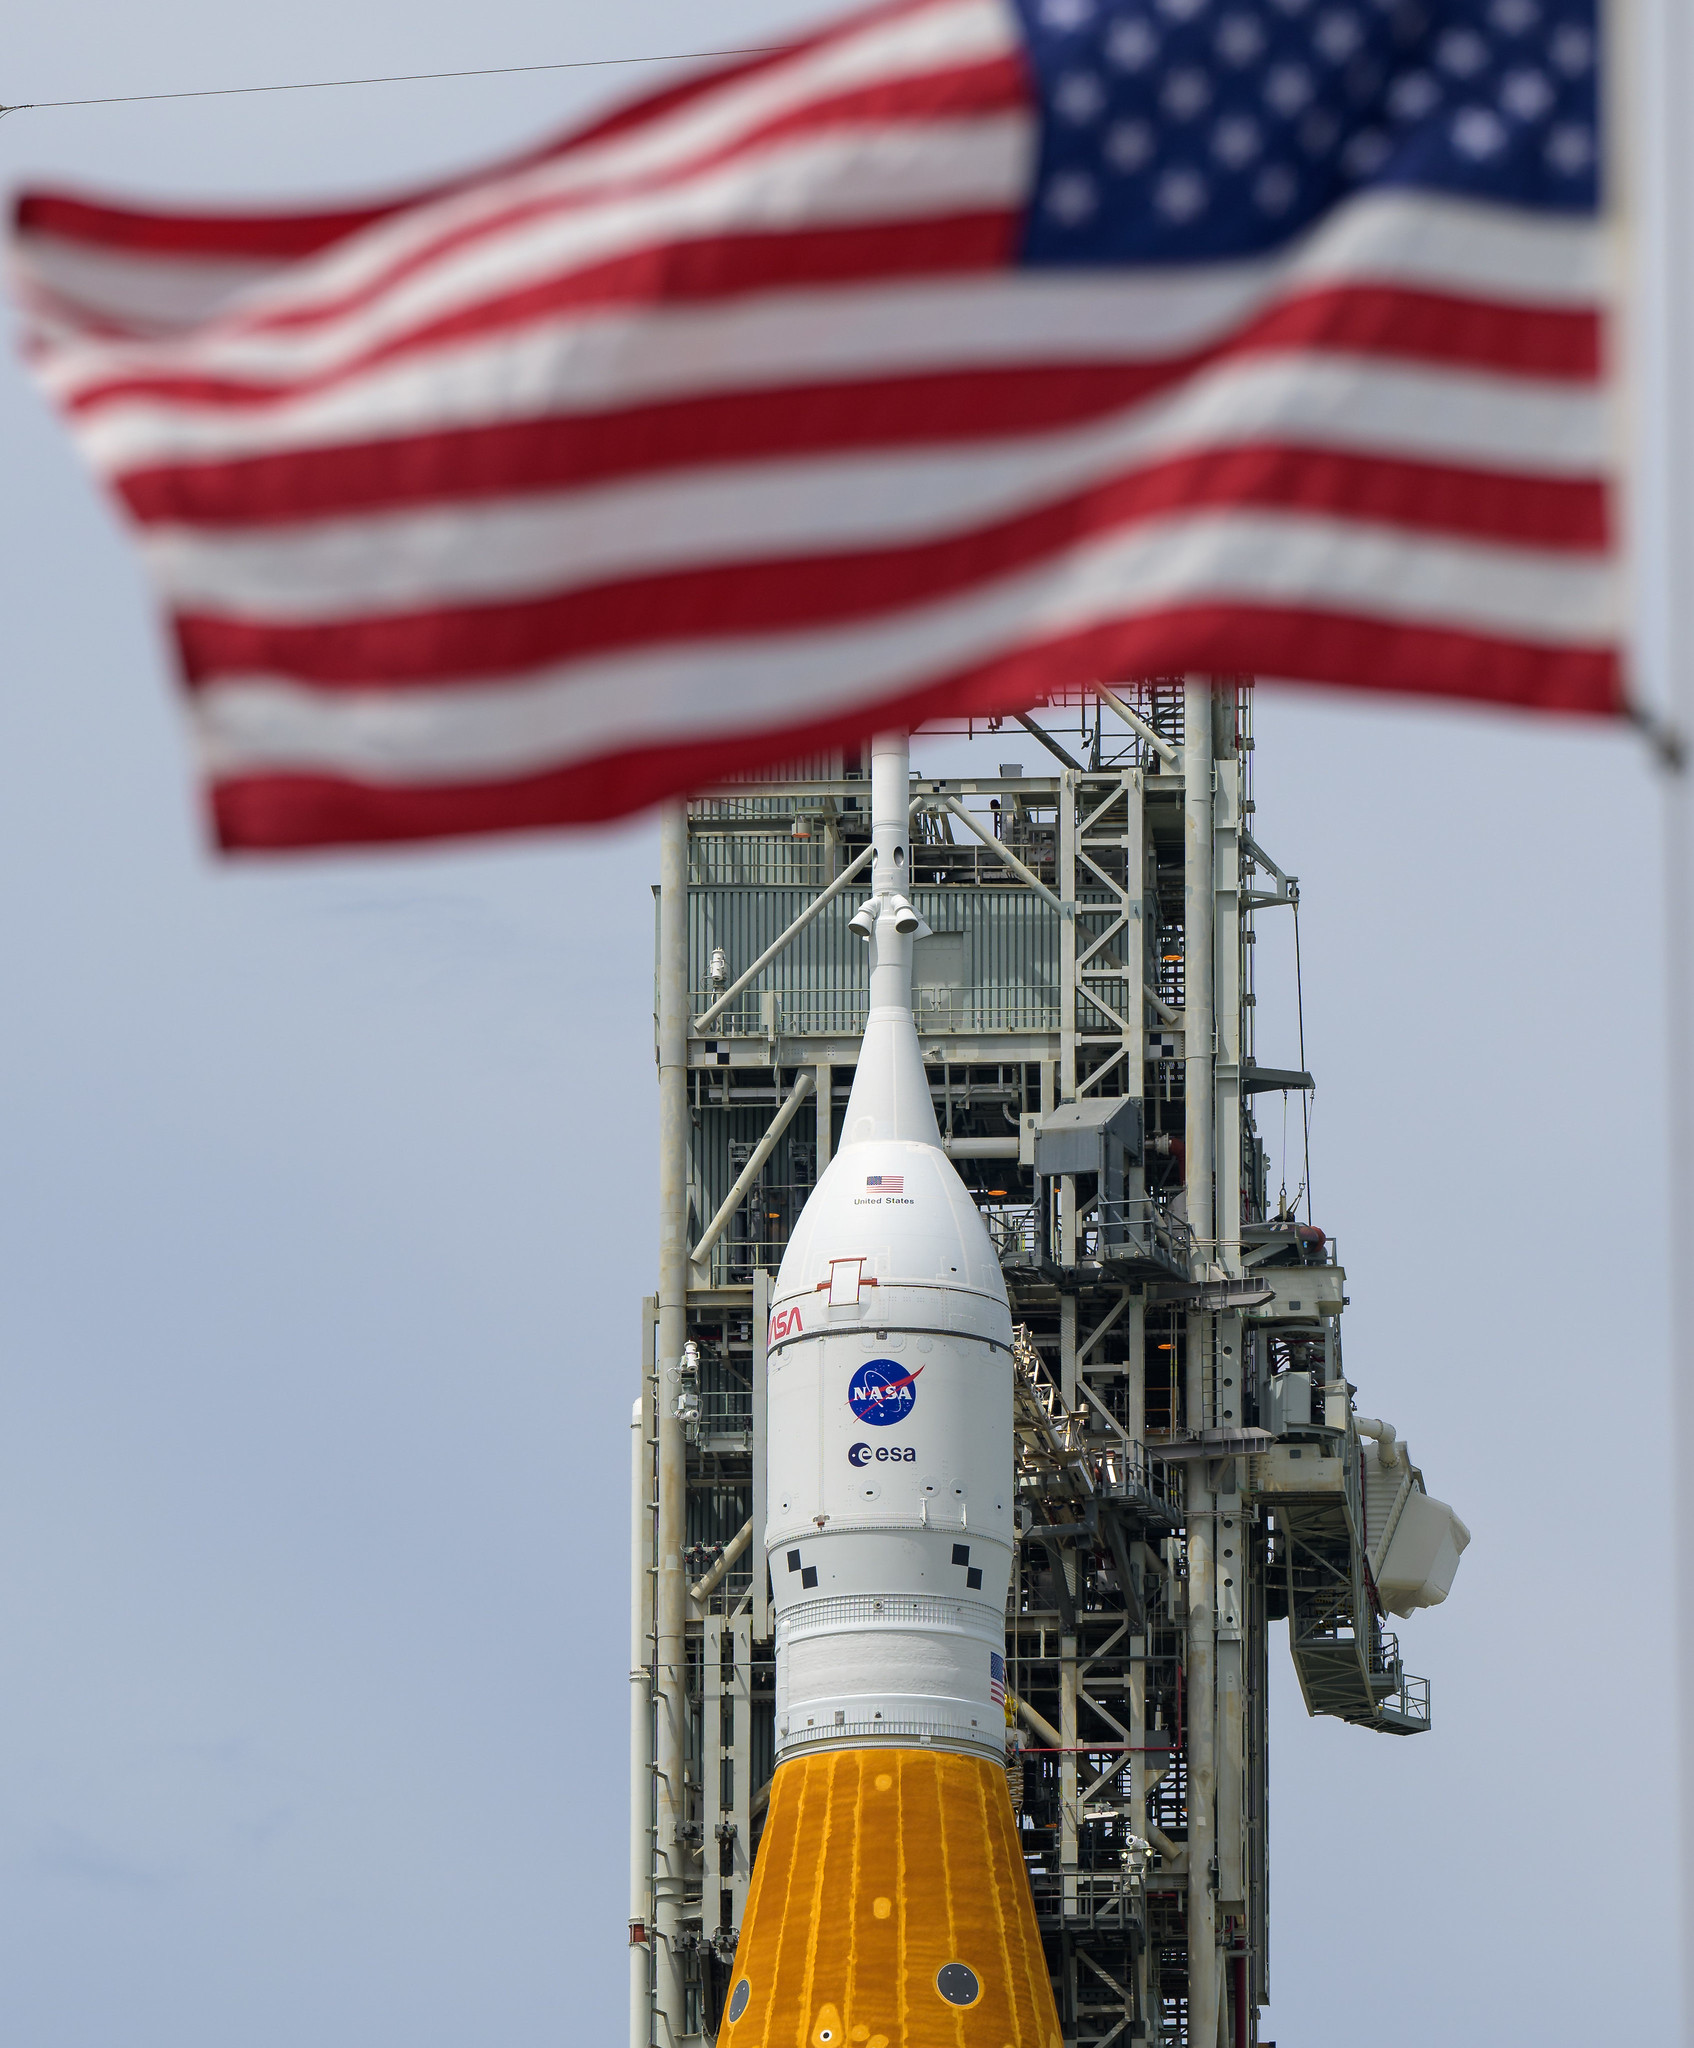 NASA’s Space Launch System (SLS) rocket with the Orion spacecraft aboard is seen atop a mobile launcher at Launch Pad 39B.